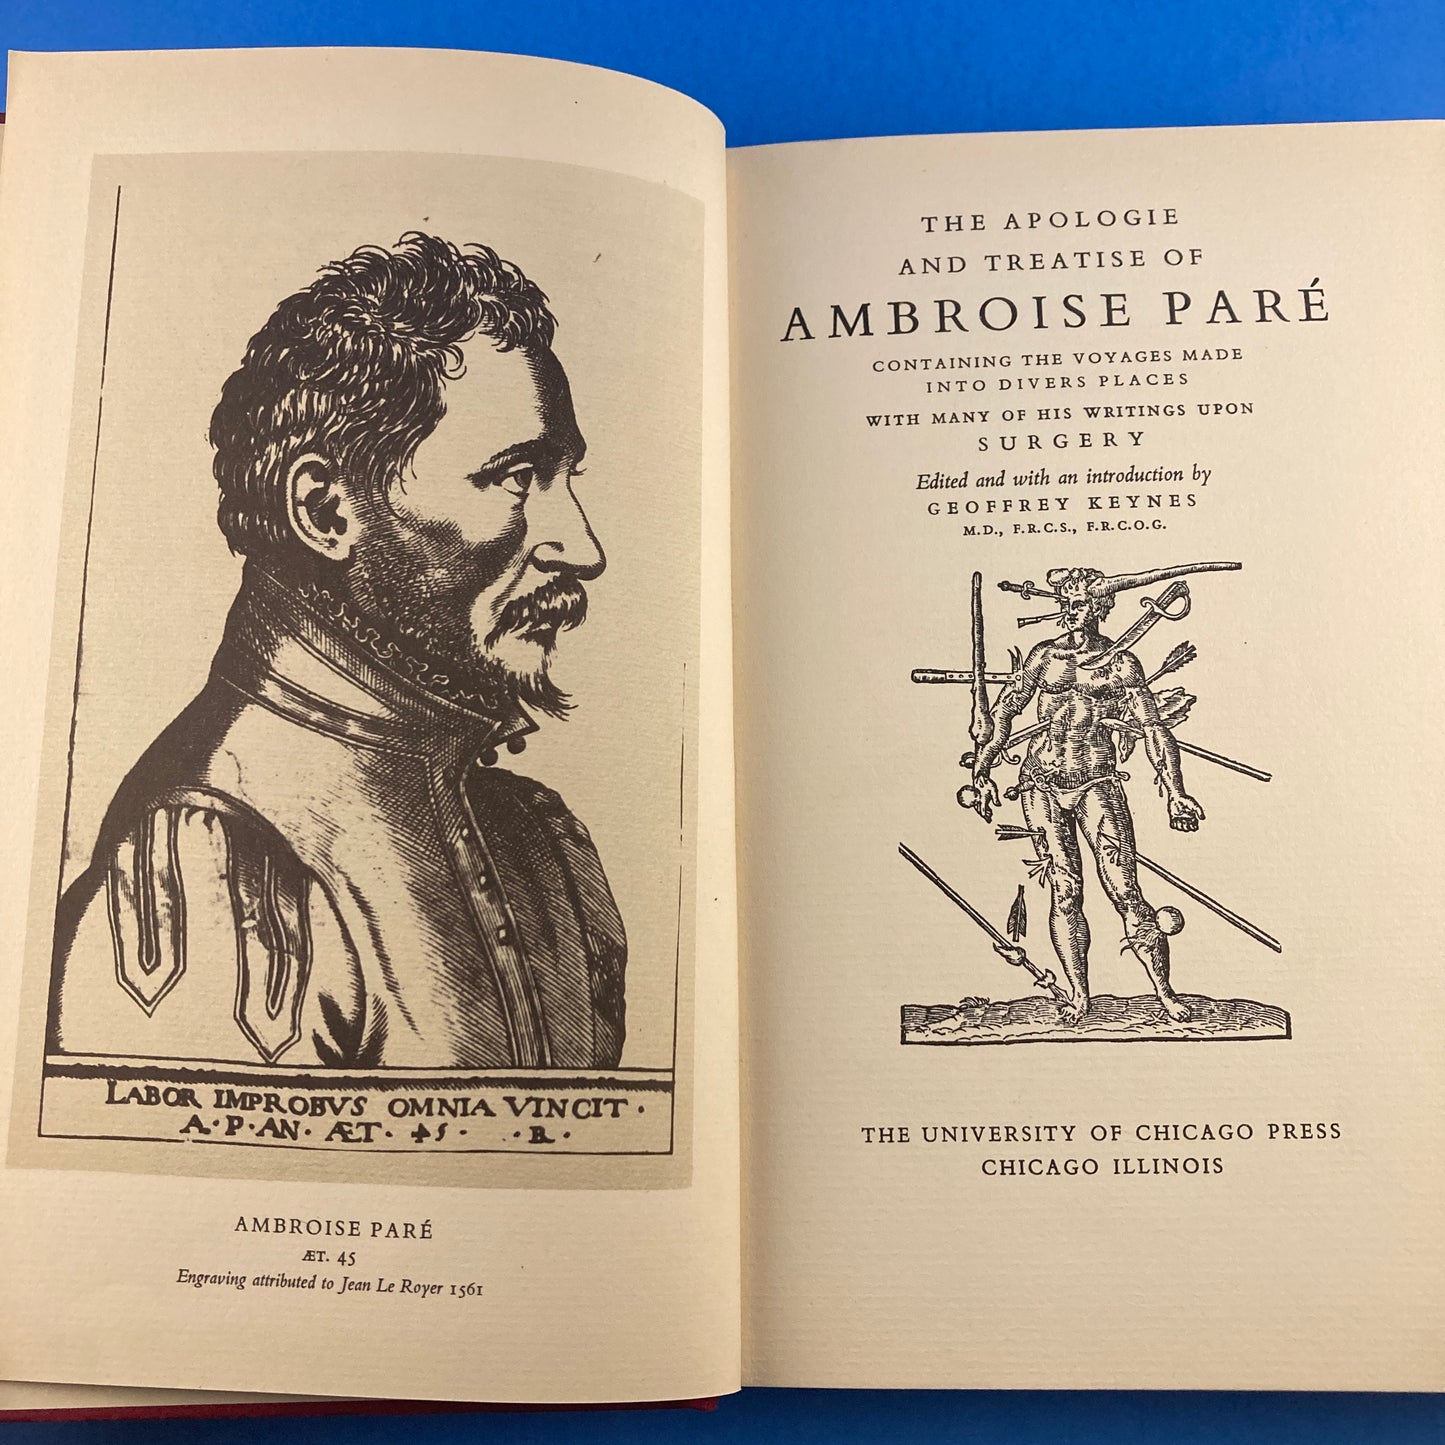 The Apologie and Treatise of Ambroise Pare